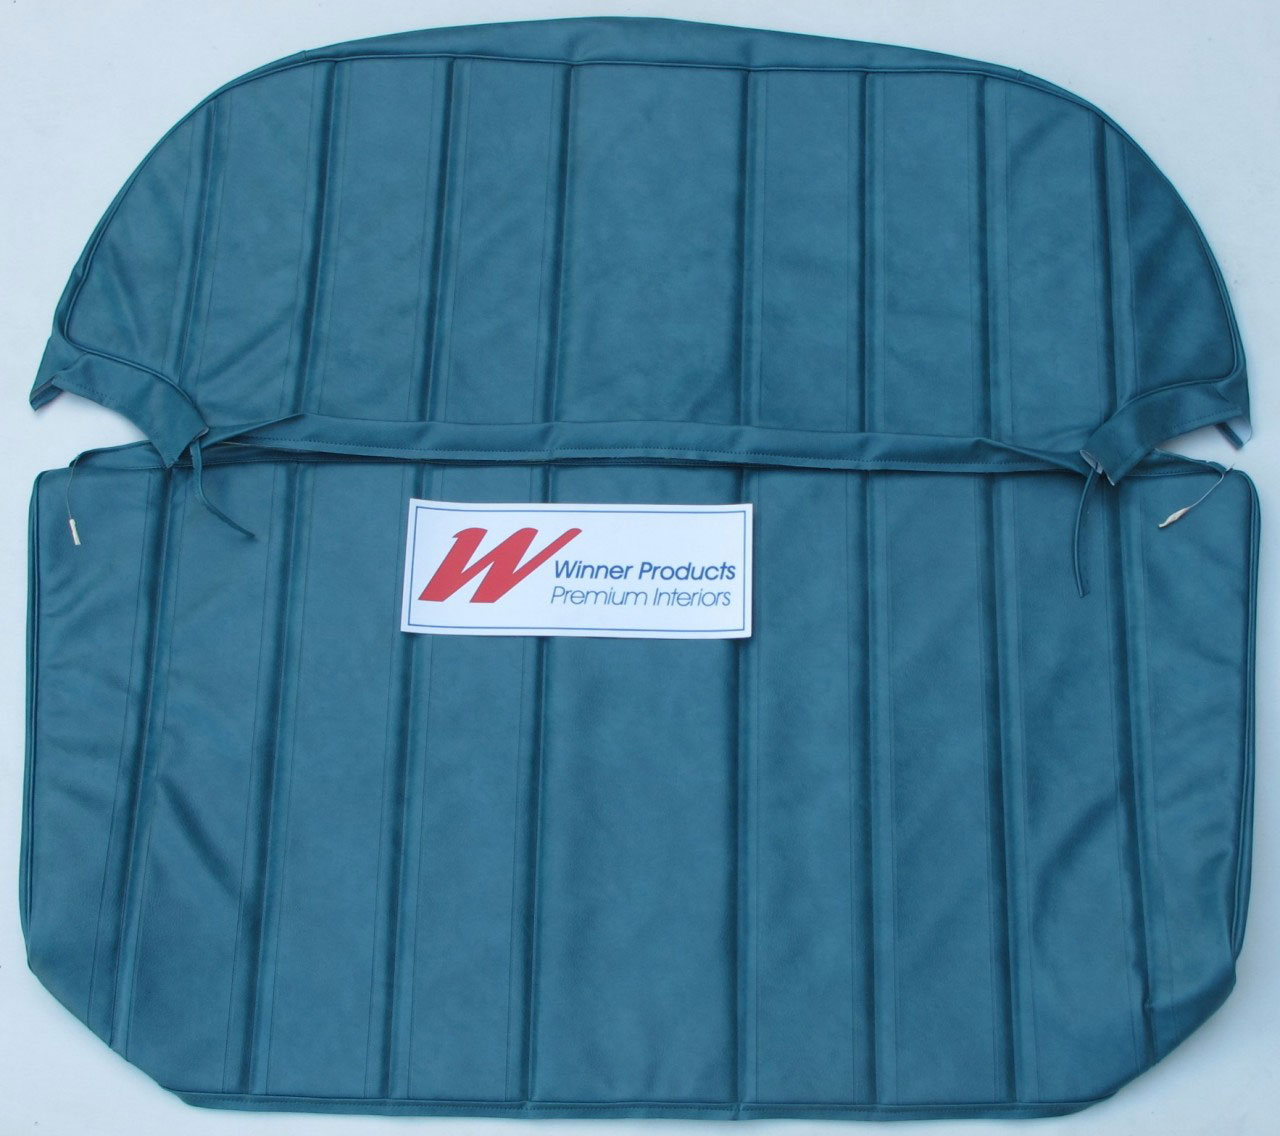 Holden Kingswood HG Kingswood Wagon 13E Turquoise Mist Seat Covers (Image 3 of 4)